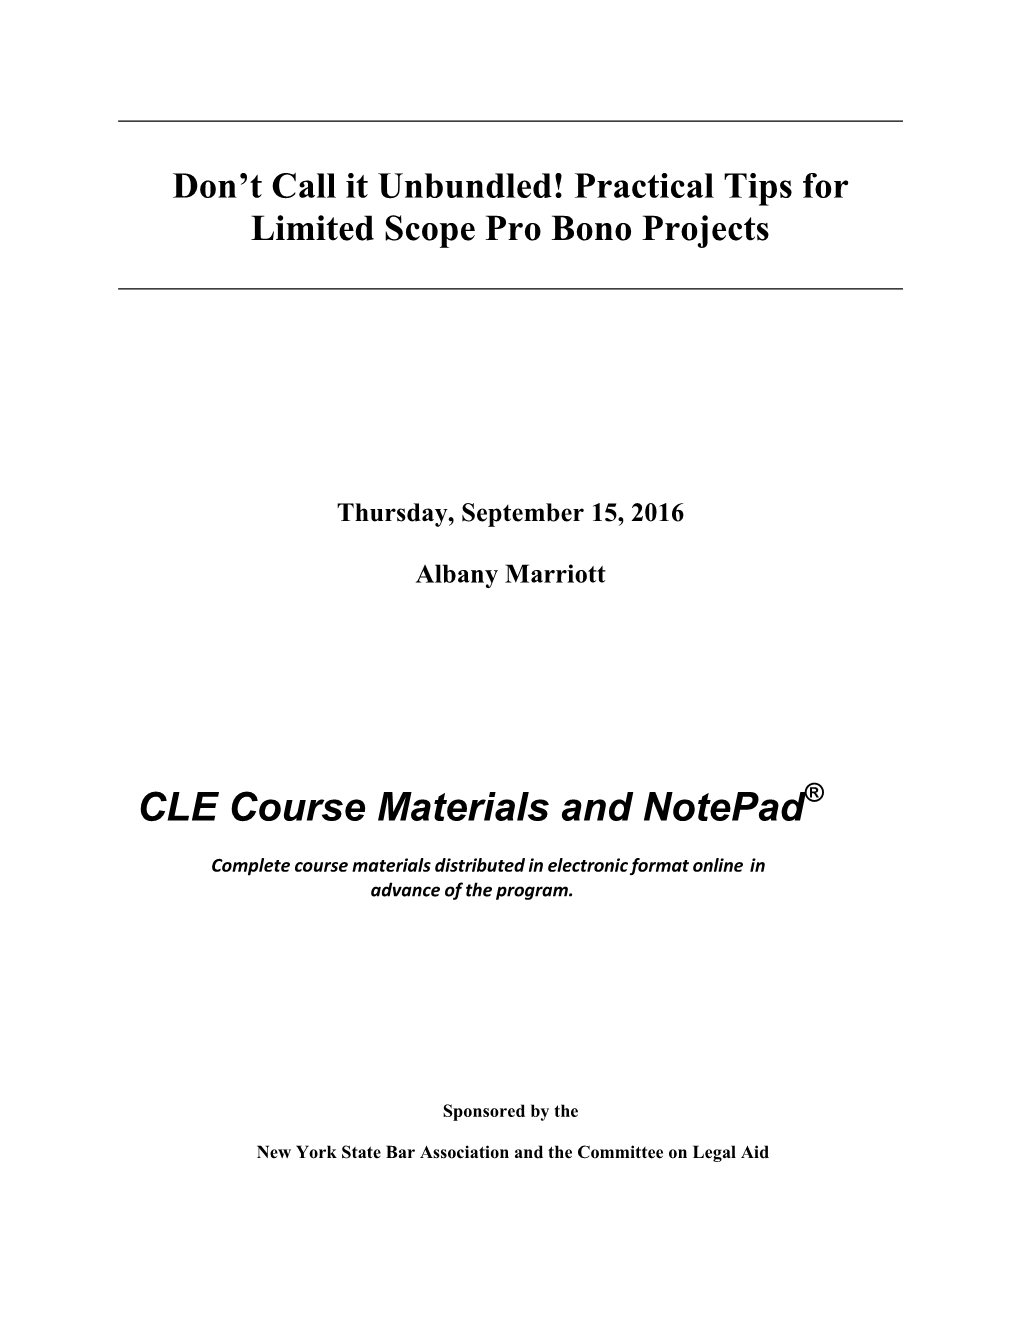 CLE Course Materials and Notepad